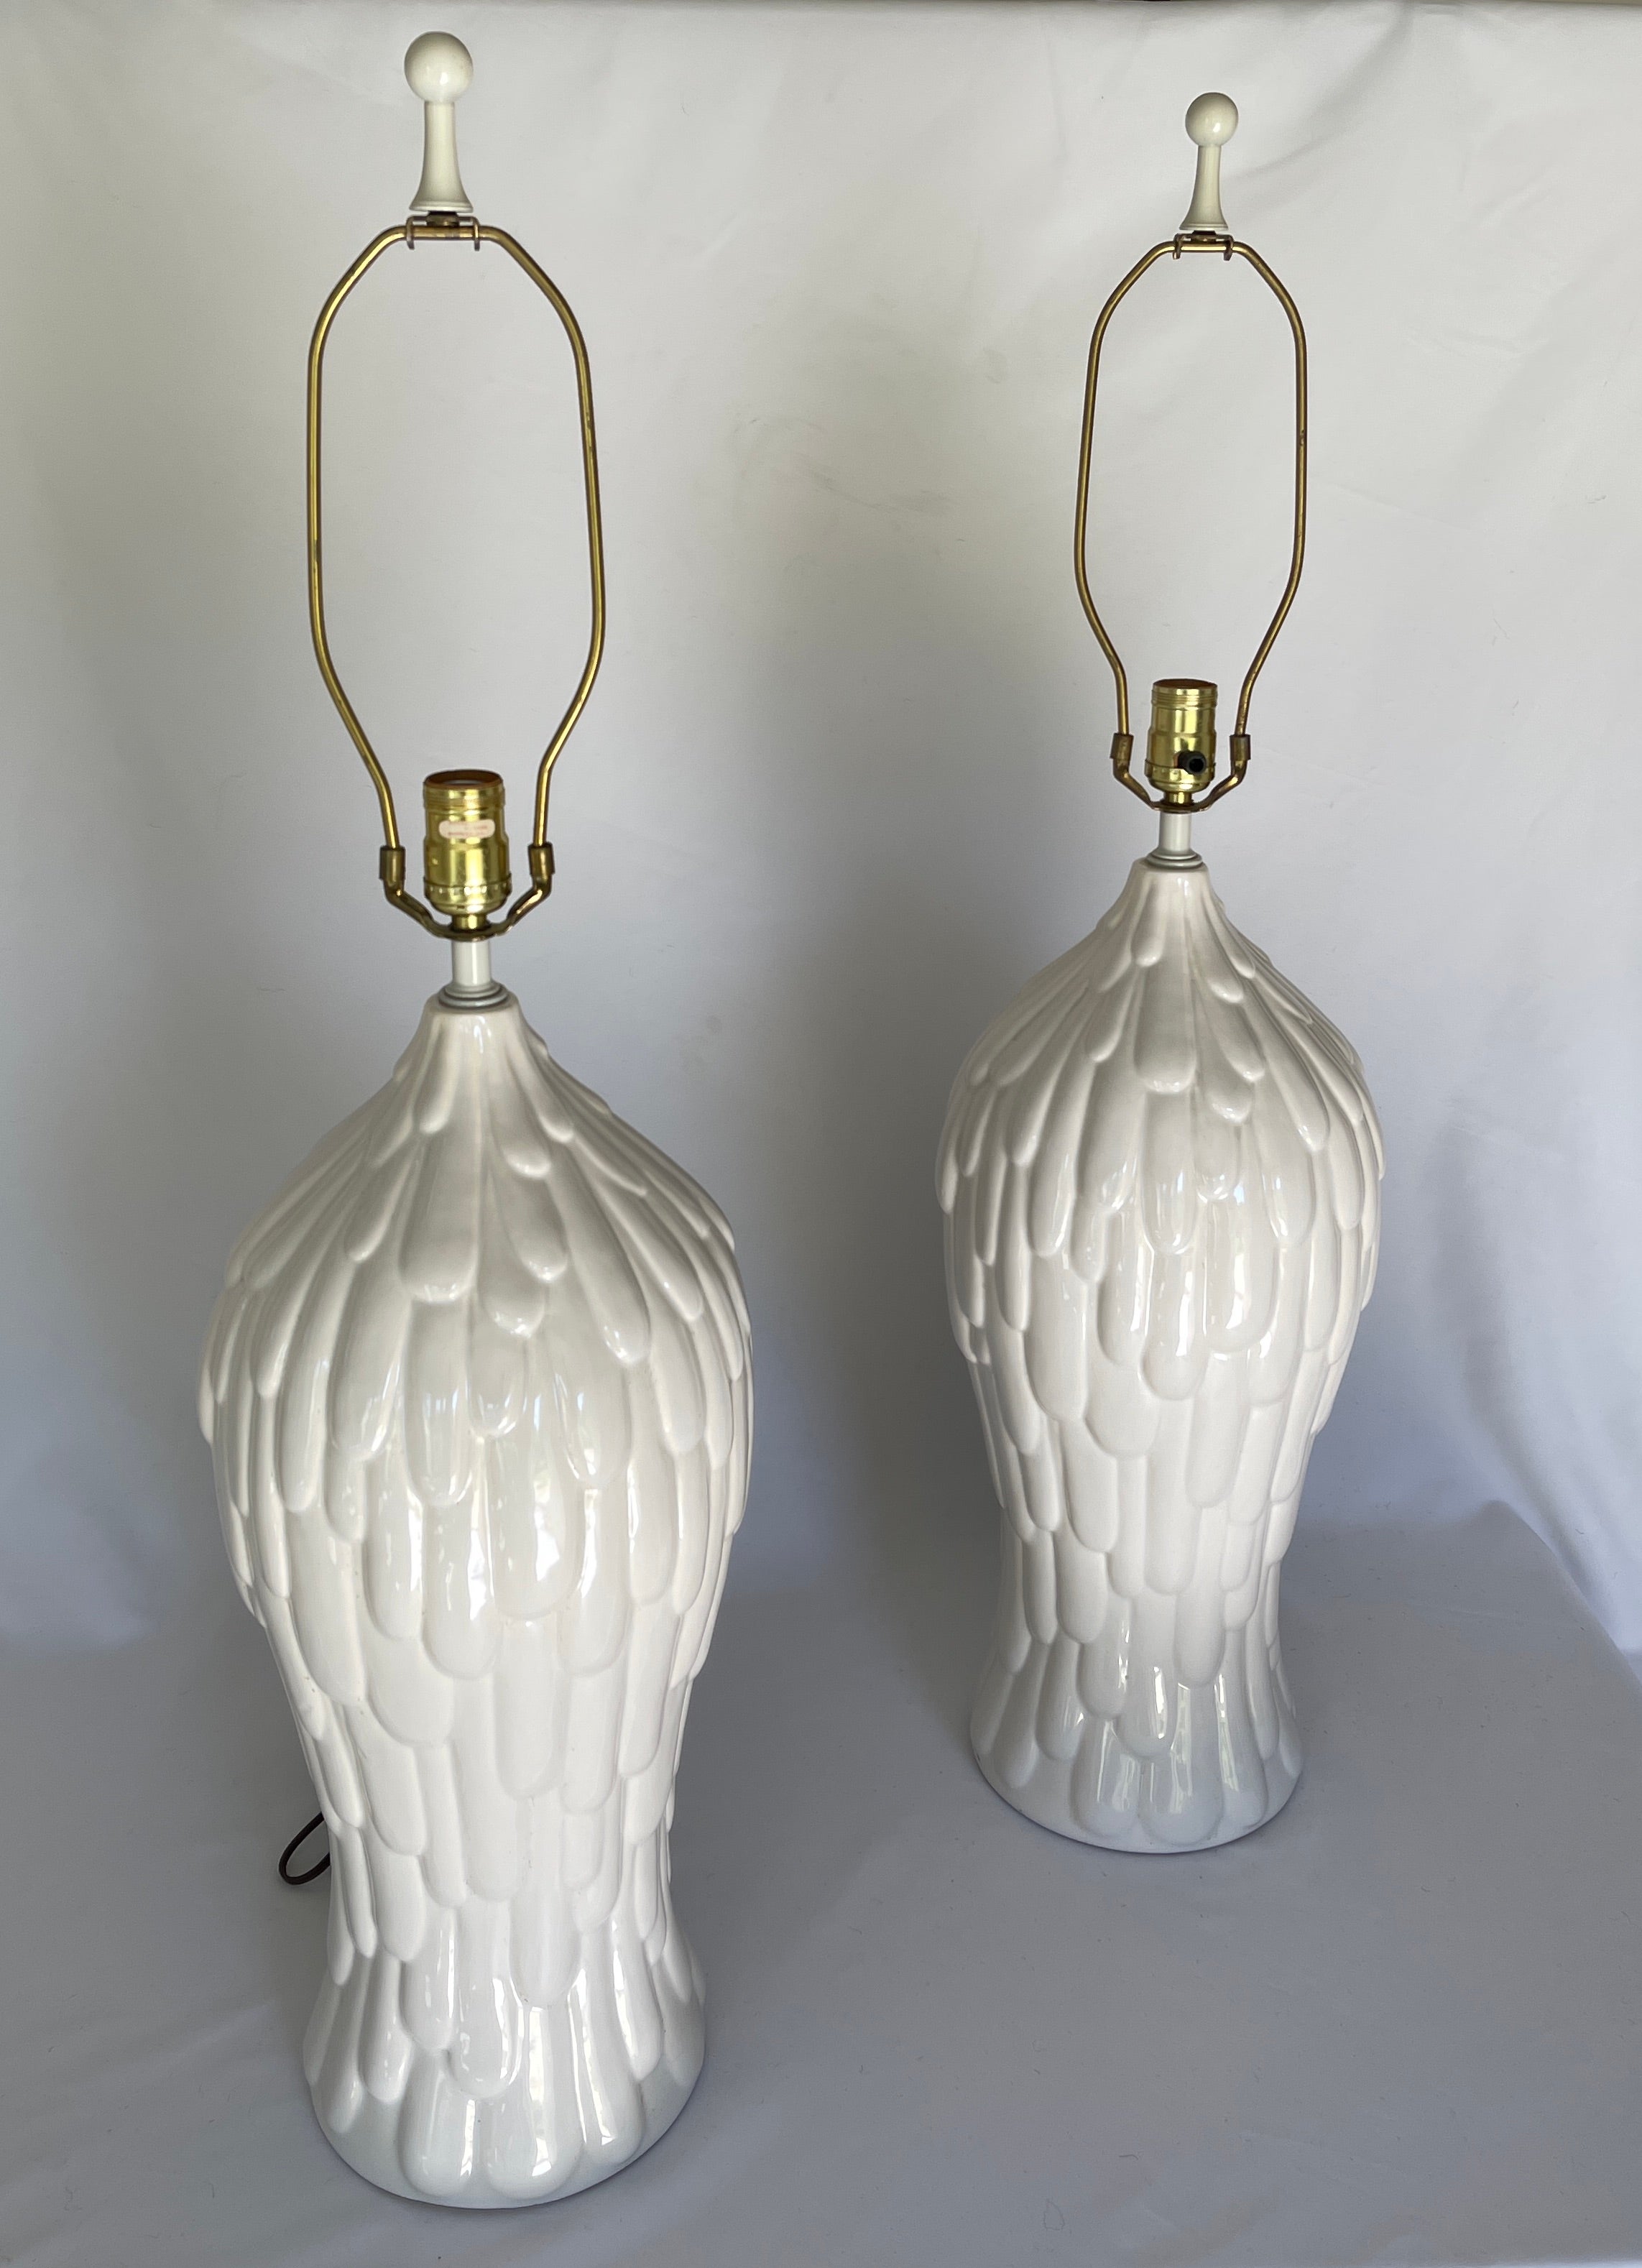 Monumental 1980's pair of glazed white pottery lamps, with original white enamelled finials. Signed Royal Haeger, with paper label on socket.

Lamps measure:
 35